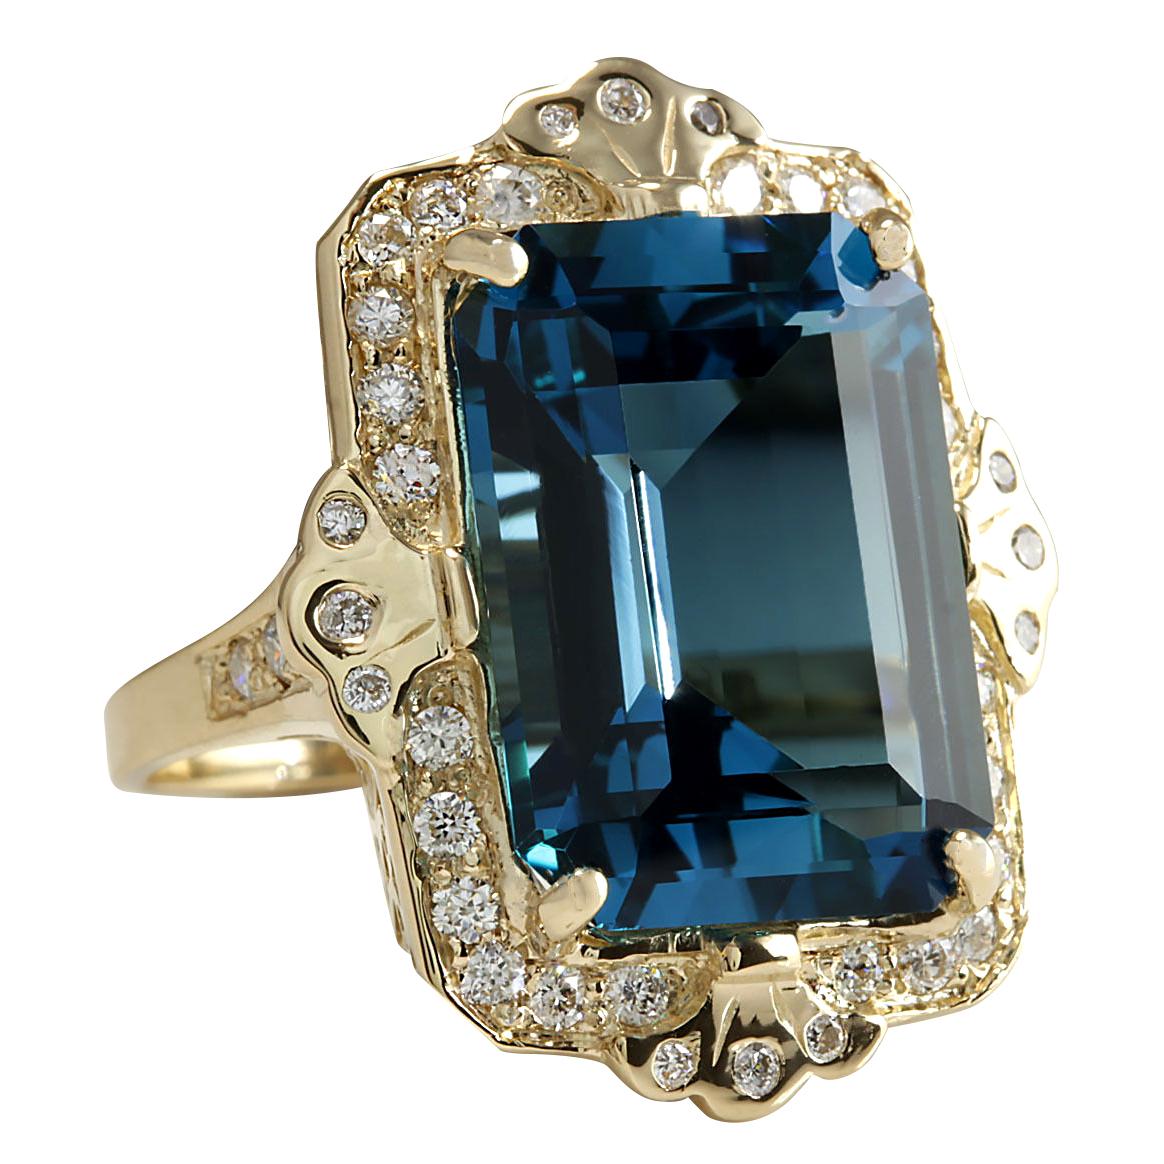 19.53 Carat Natural Topaz 14 Karat Yellow Gold Diamond Ring
Stamped: 14K Yellow Gold
Total Ring Weight: 11.5 Grams
Total Natural Topaz Weight is 18.63 Carat (Measures: 18.00x13.00 mm)
Color: London Blue
Total Natural Diamond Weight is 0.90